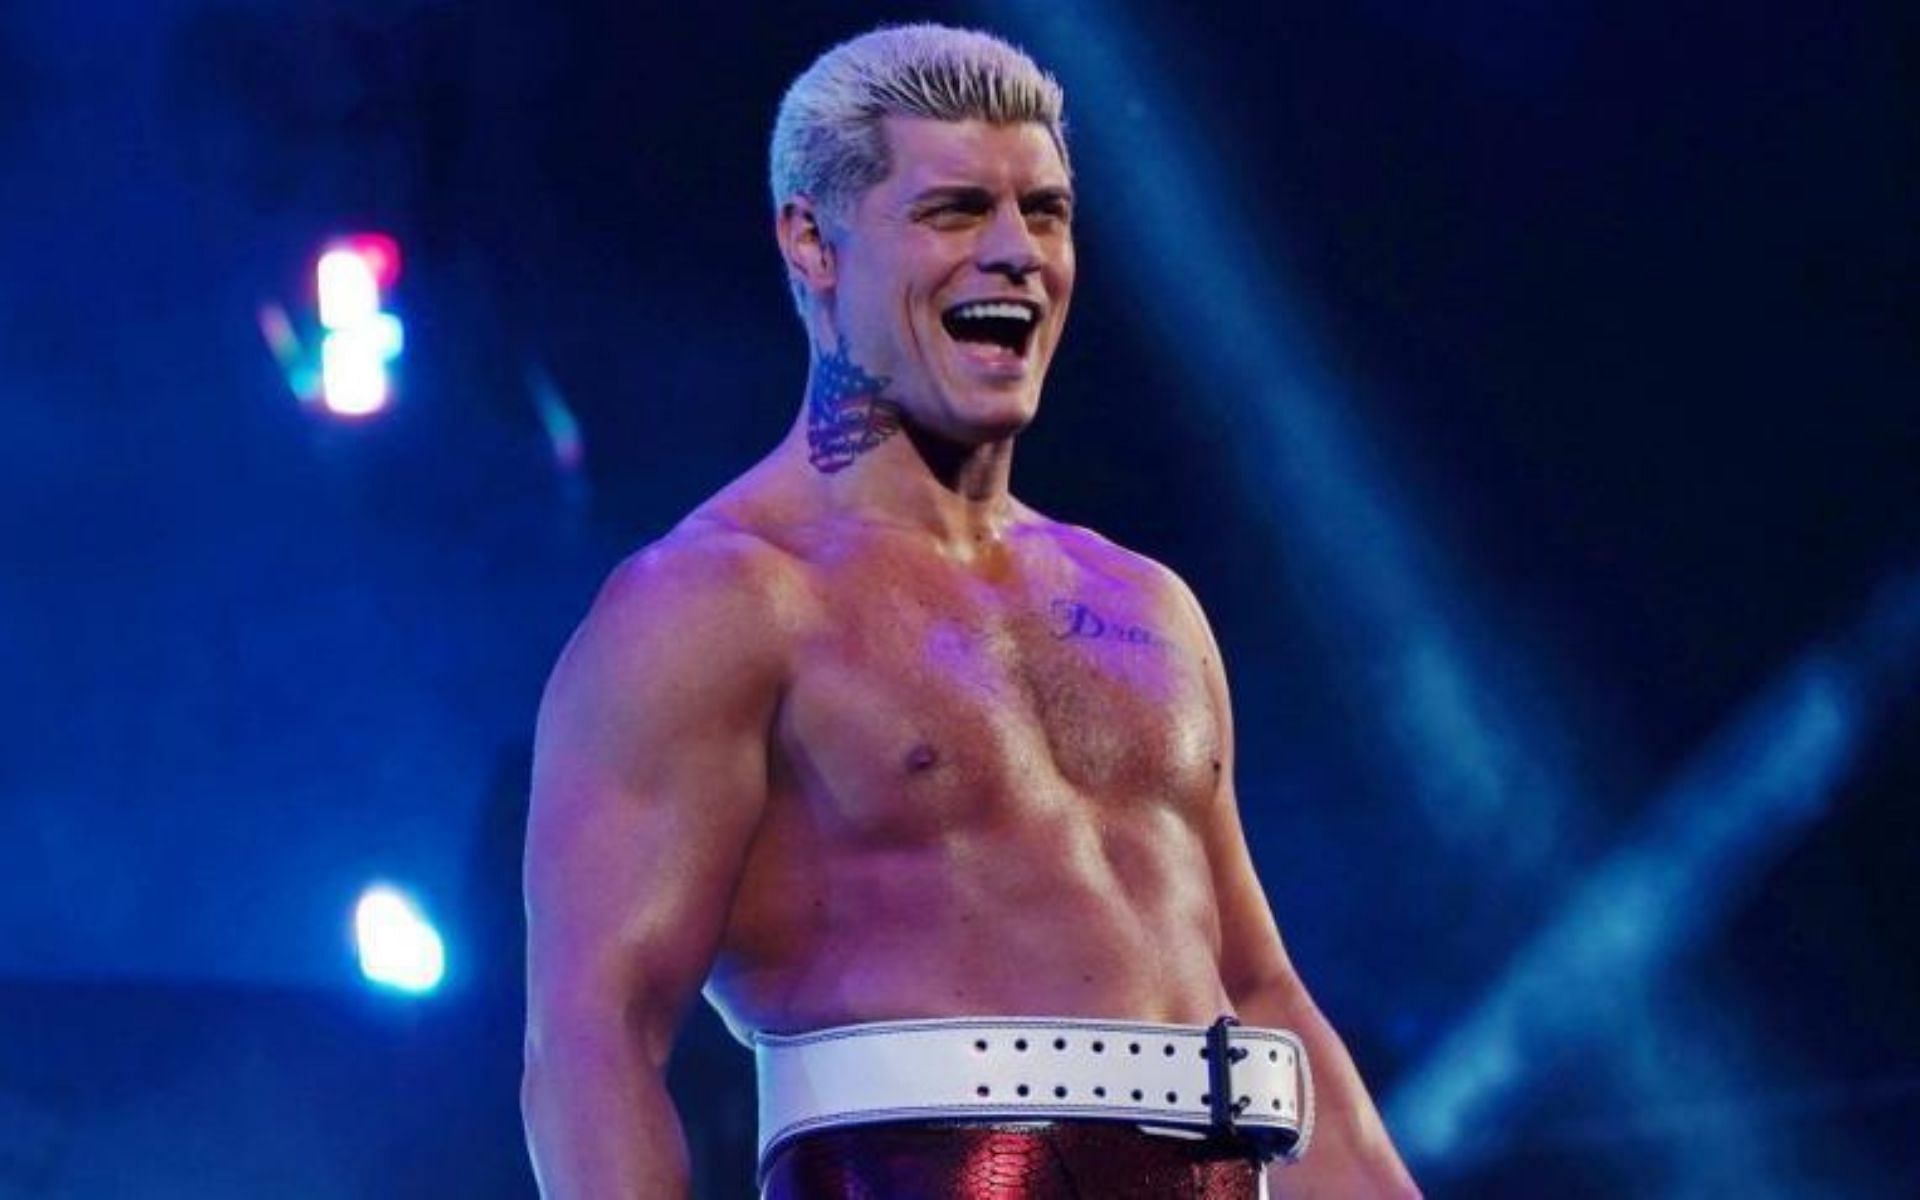 Cody Rhodes recently returned to WWE